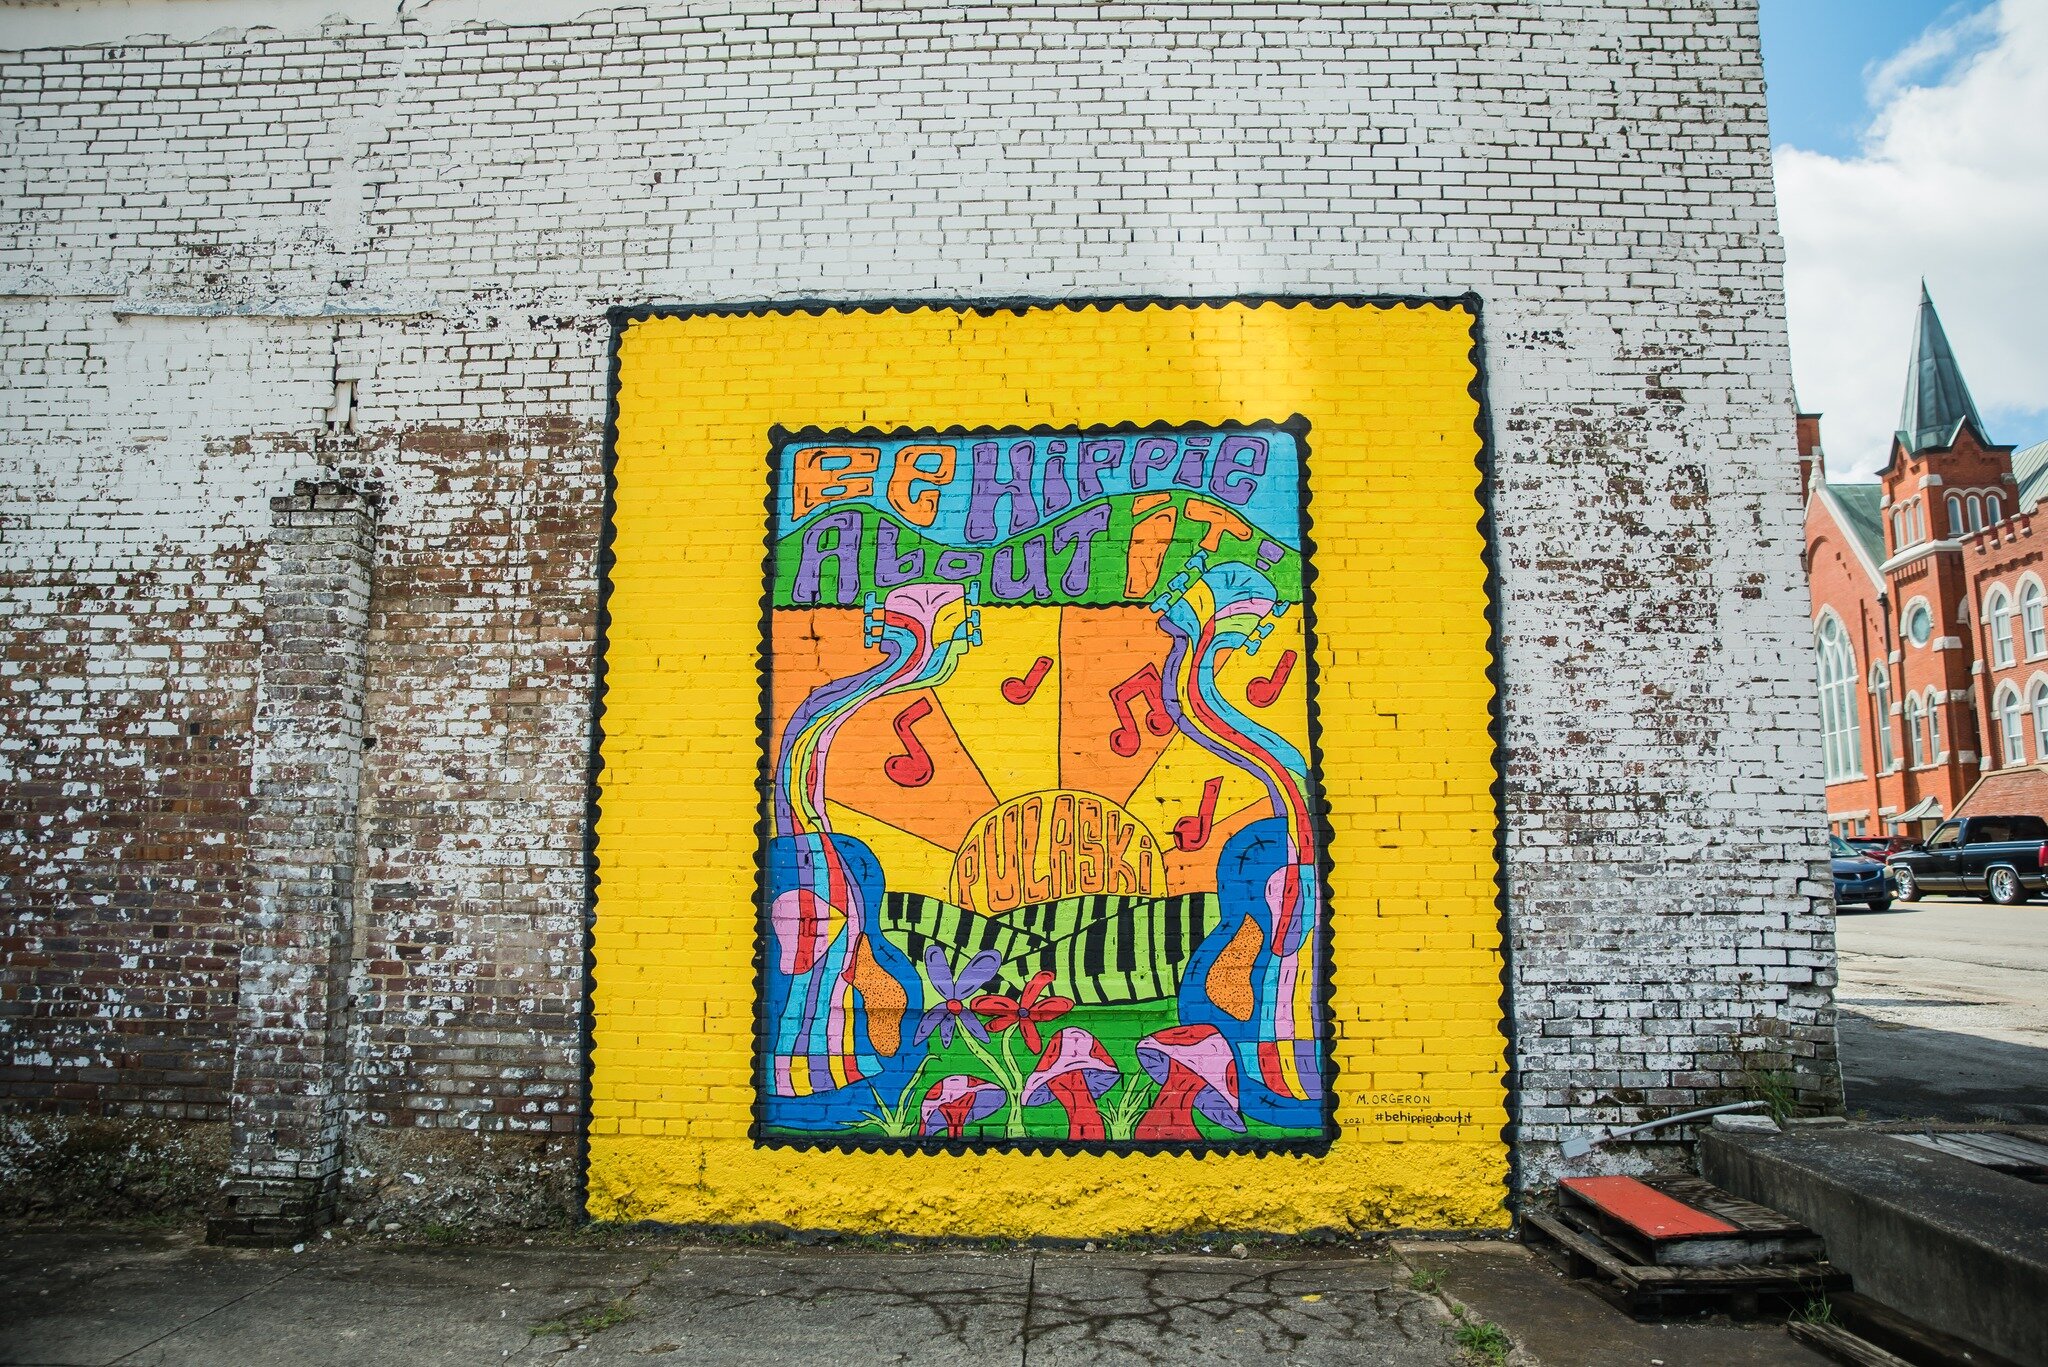 This week, we're highlighting the murals that serve as art and photo op in Historic Downtown Pulaski 📸 🖼️

Located at 218 N 2nd St on the Eslick Tractor &amp; Motor Co. building, the &quot;Be Hippie About It&quot; mural is painted in a 70s style de